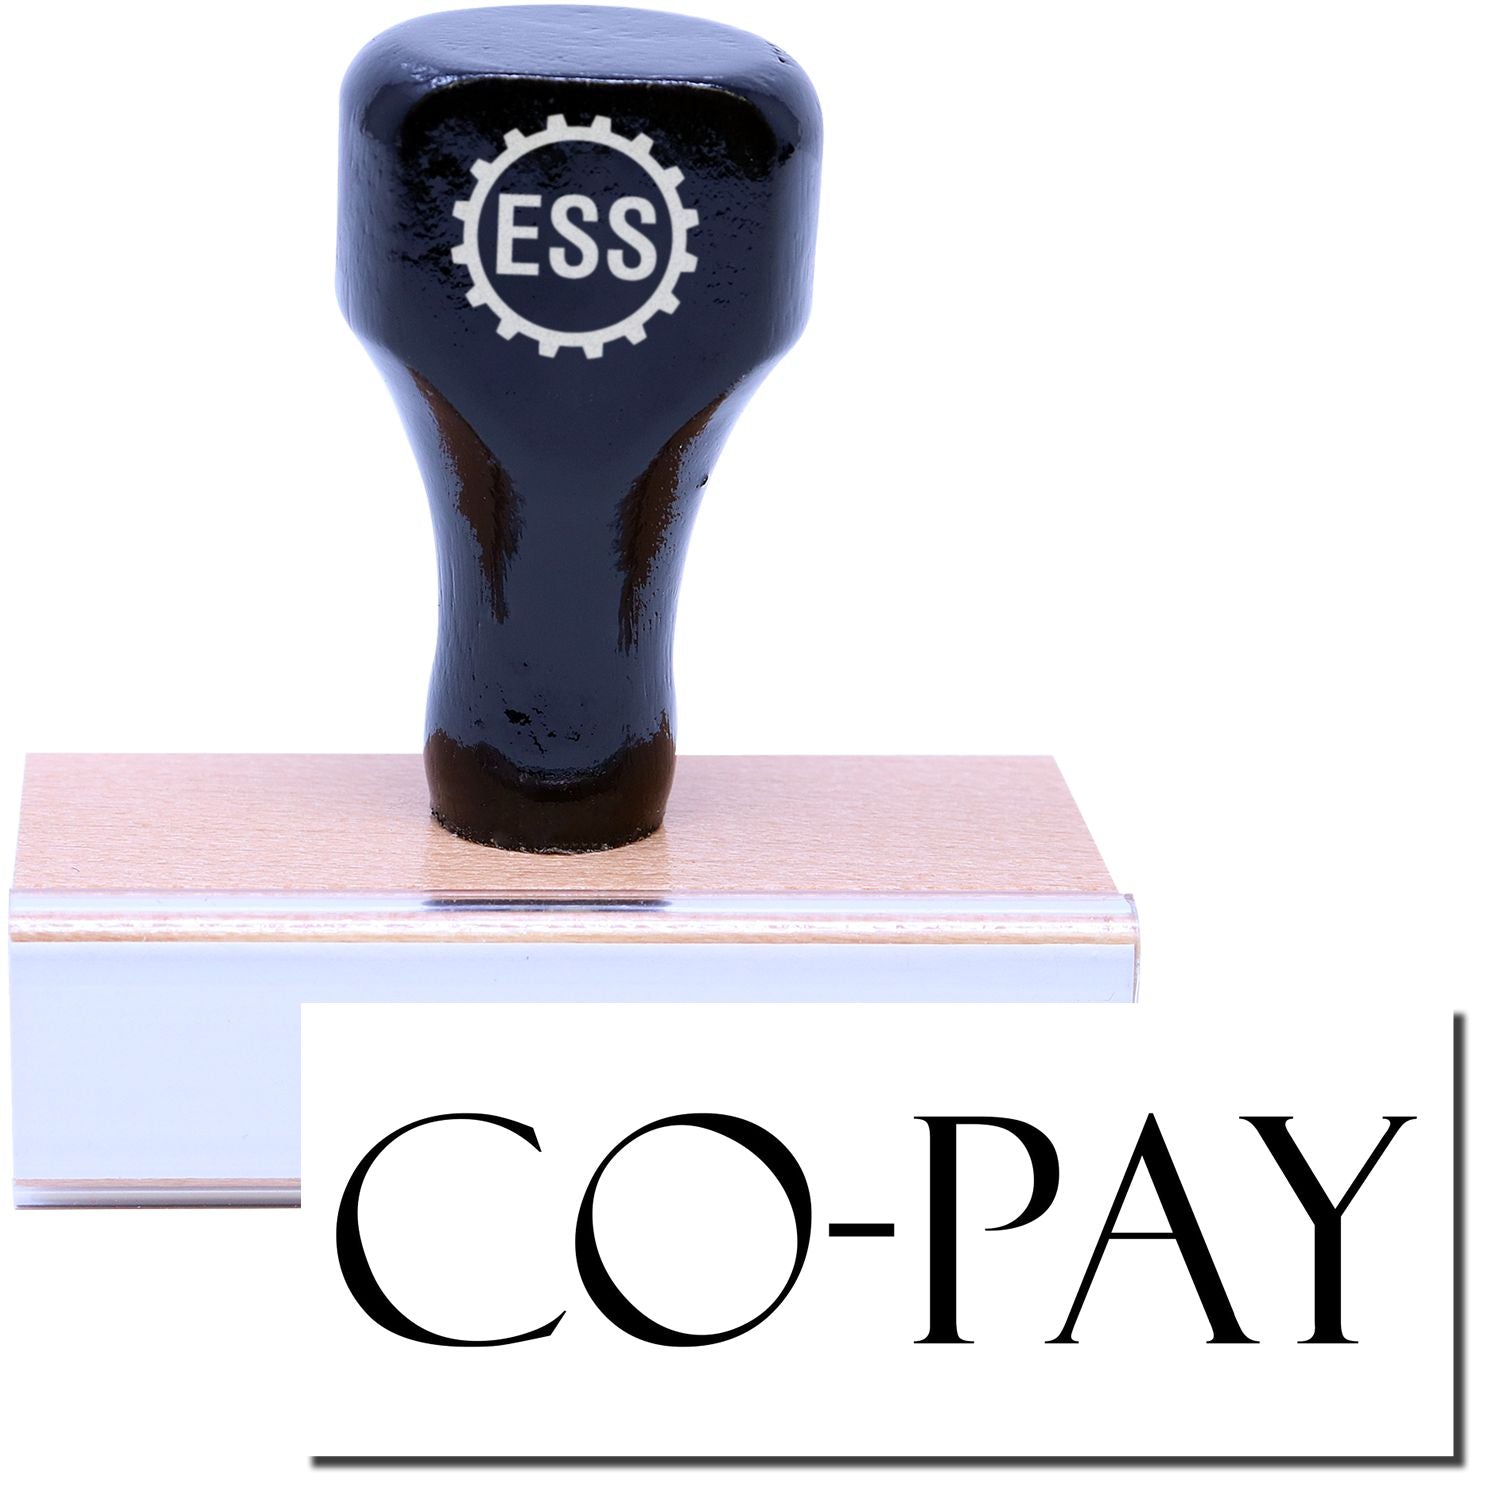 A stock office rubber stamp with a stamped image showing how the text "CO-PAY" in a large font is displayed after stamping.